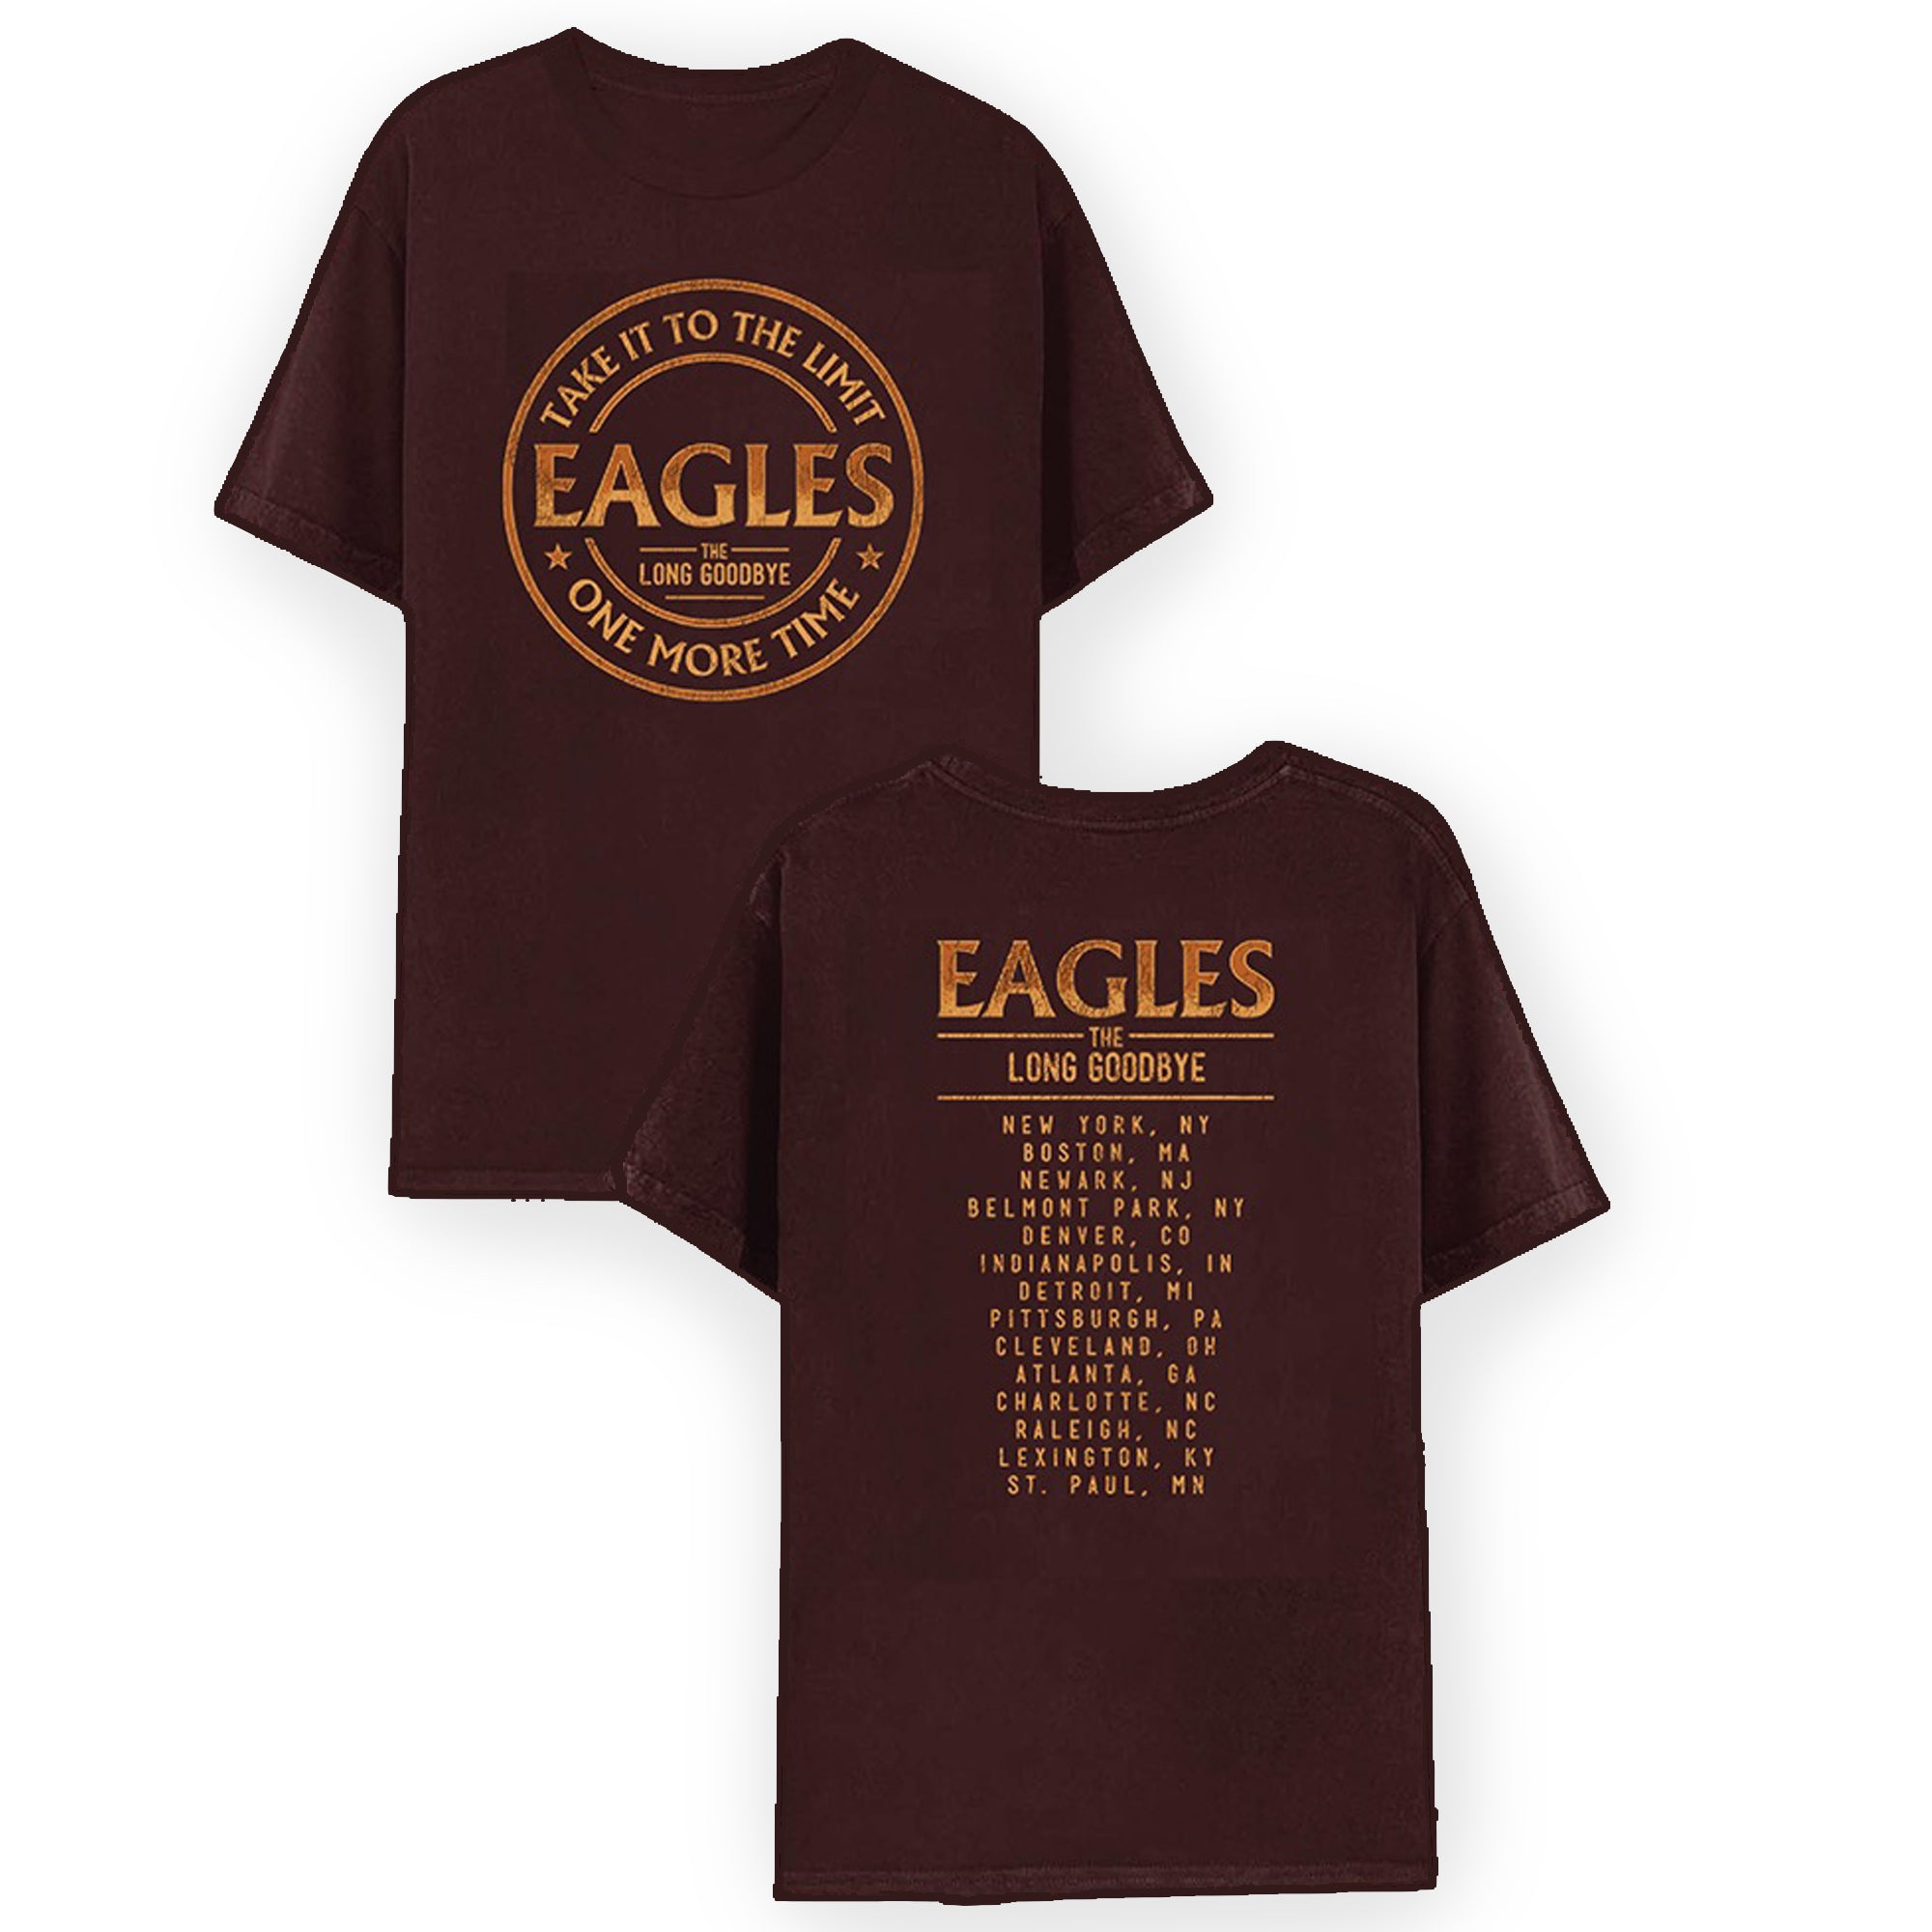 Buy Eagles T shirt - Take It To The Limit at 5% OFF 🤑 – The Banyan Tee